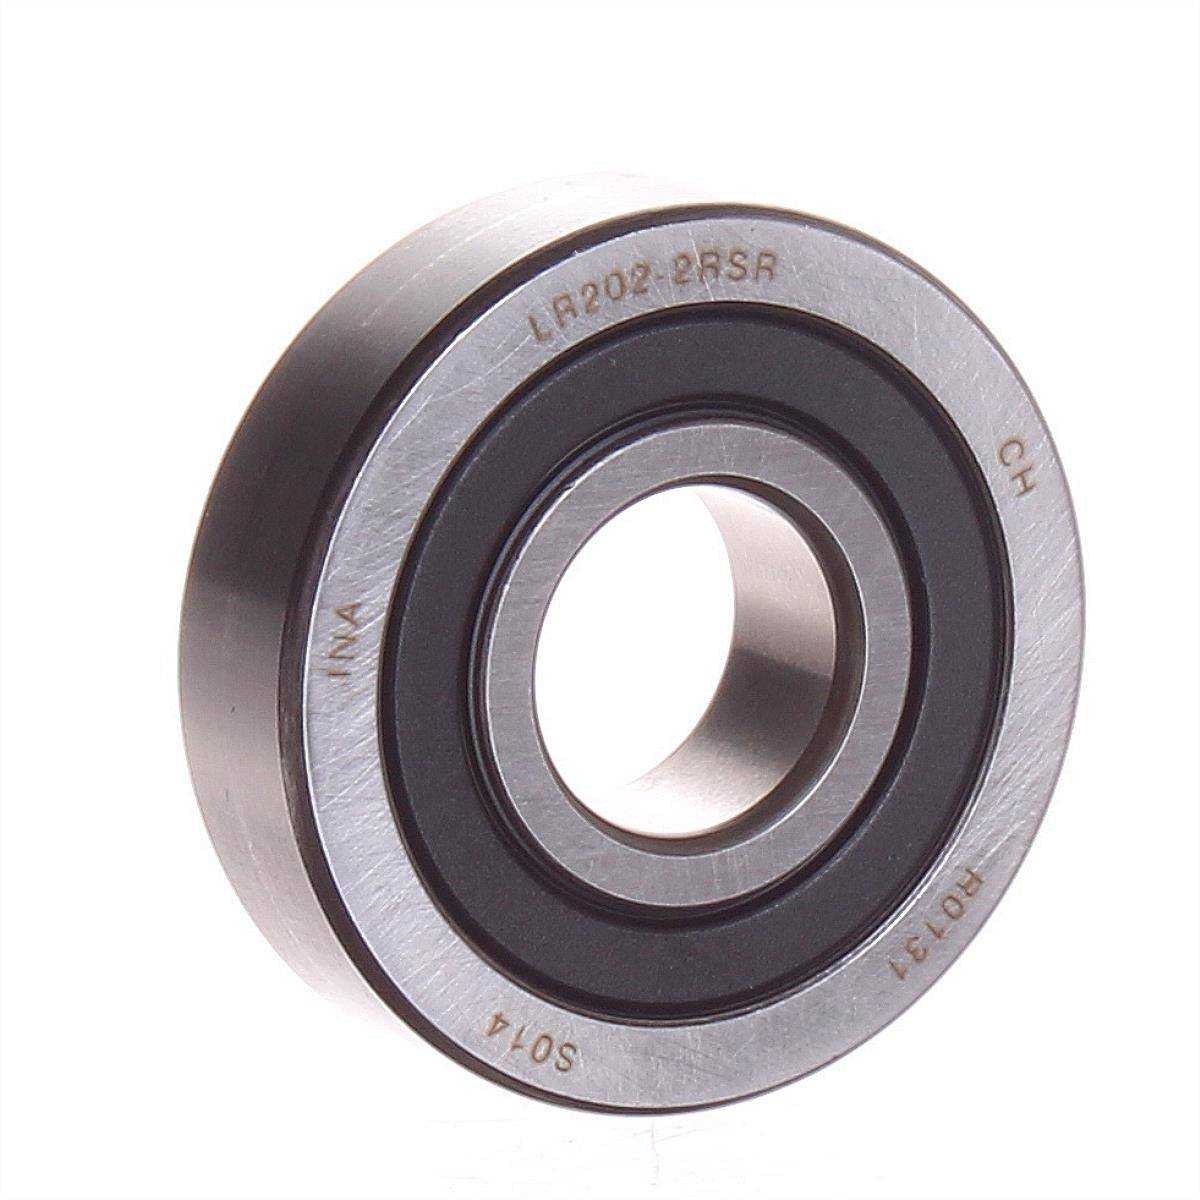 BALL BEARING LR-202-NPP-INA (WITHOUT PACKAGING) - Image 1